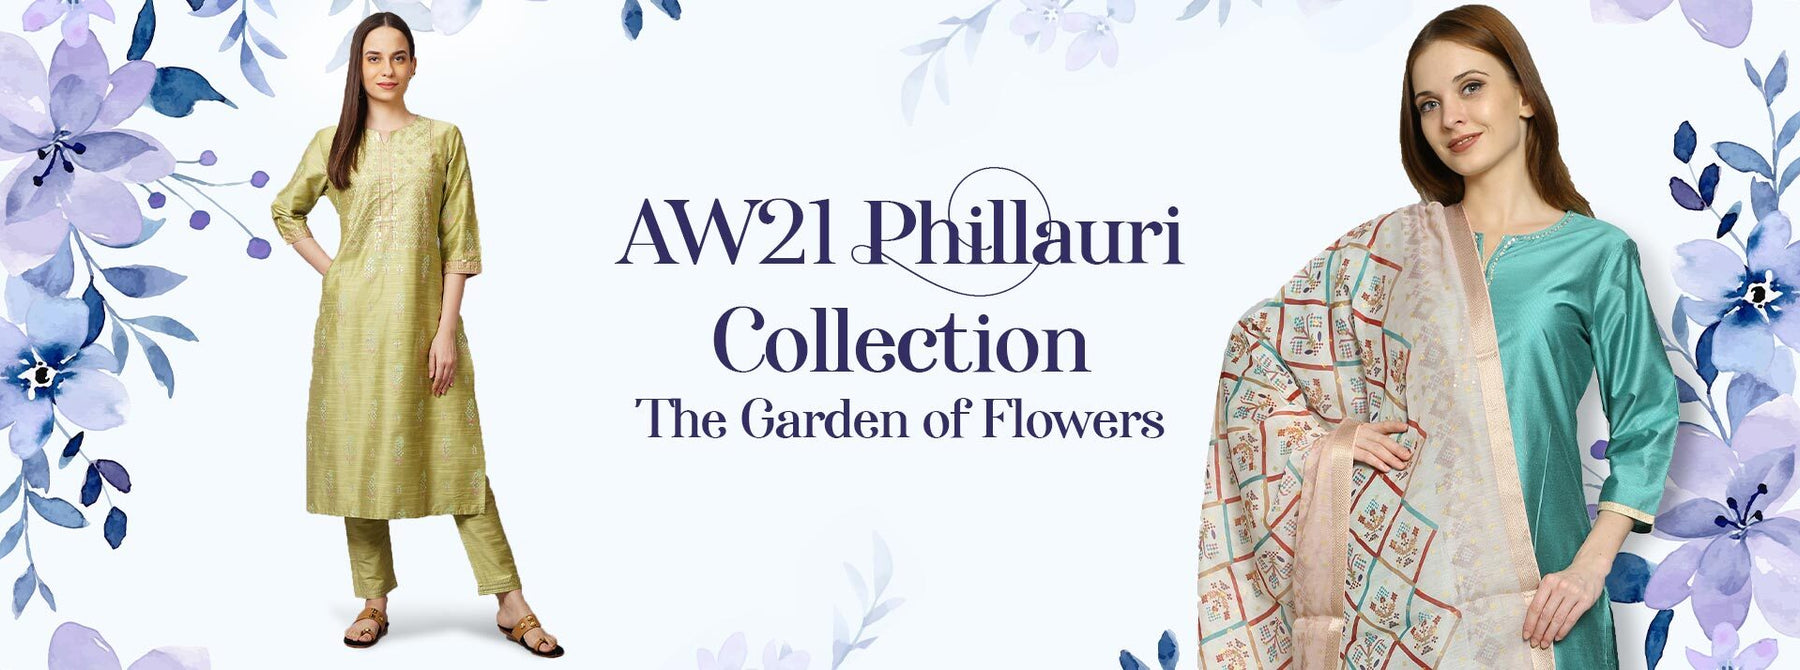 AW21 Philauri Collection- The Garden of Flowers